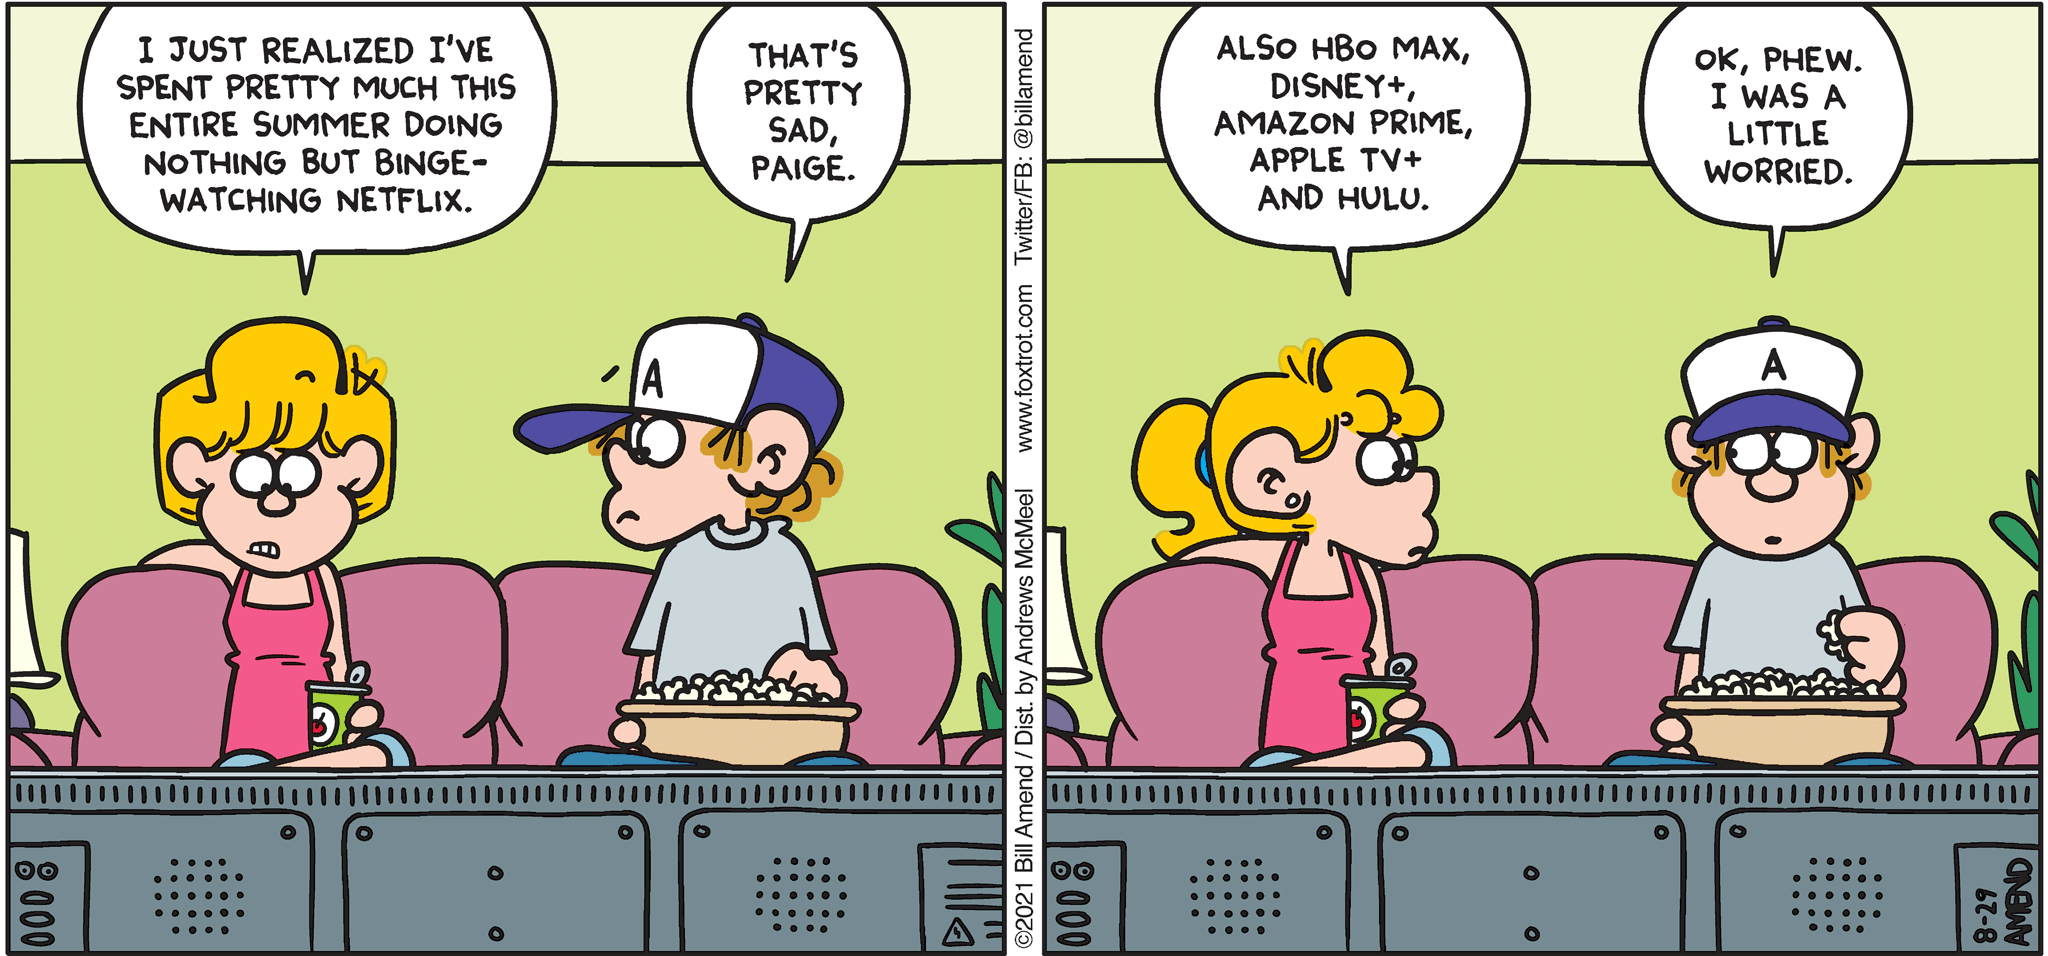 FoxTrot comic strip by Bill Amend - "Summertime Sadness" published August 29, 2021 - Paige Fox: I just realized I've spent pretty much this entire summer doing nothing but binge-watching Netflix. Peter Fox: That's pretty sad, Paige. Paige Fox: Also, HBO MAX, Disney+, Amazon Prime, Apple TV+, and Hulu. Peter Fox: Ok, phew. I was a little worried. 